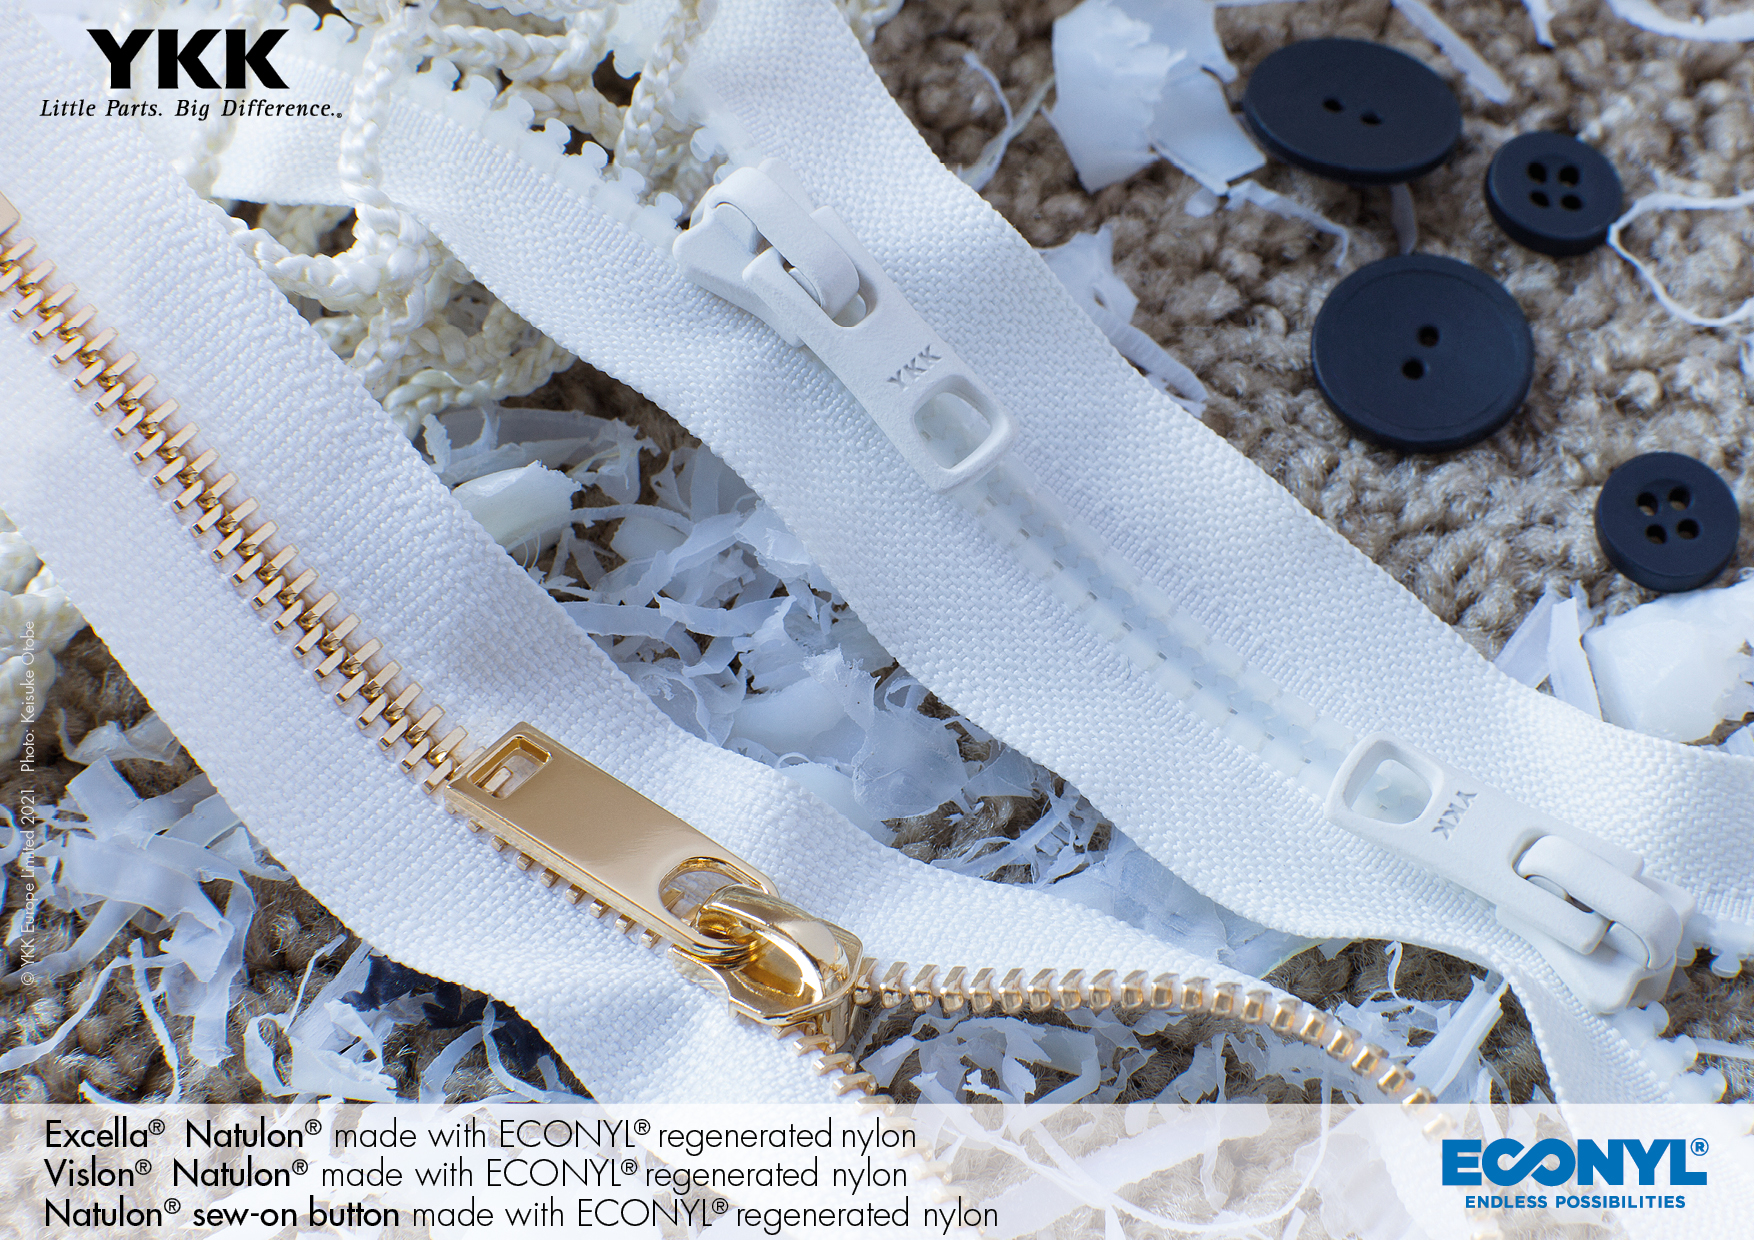 YKK Announces New Collection of Recycled Zippers Made with ECONYL® Regenerated Nylon in Europe